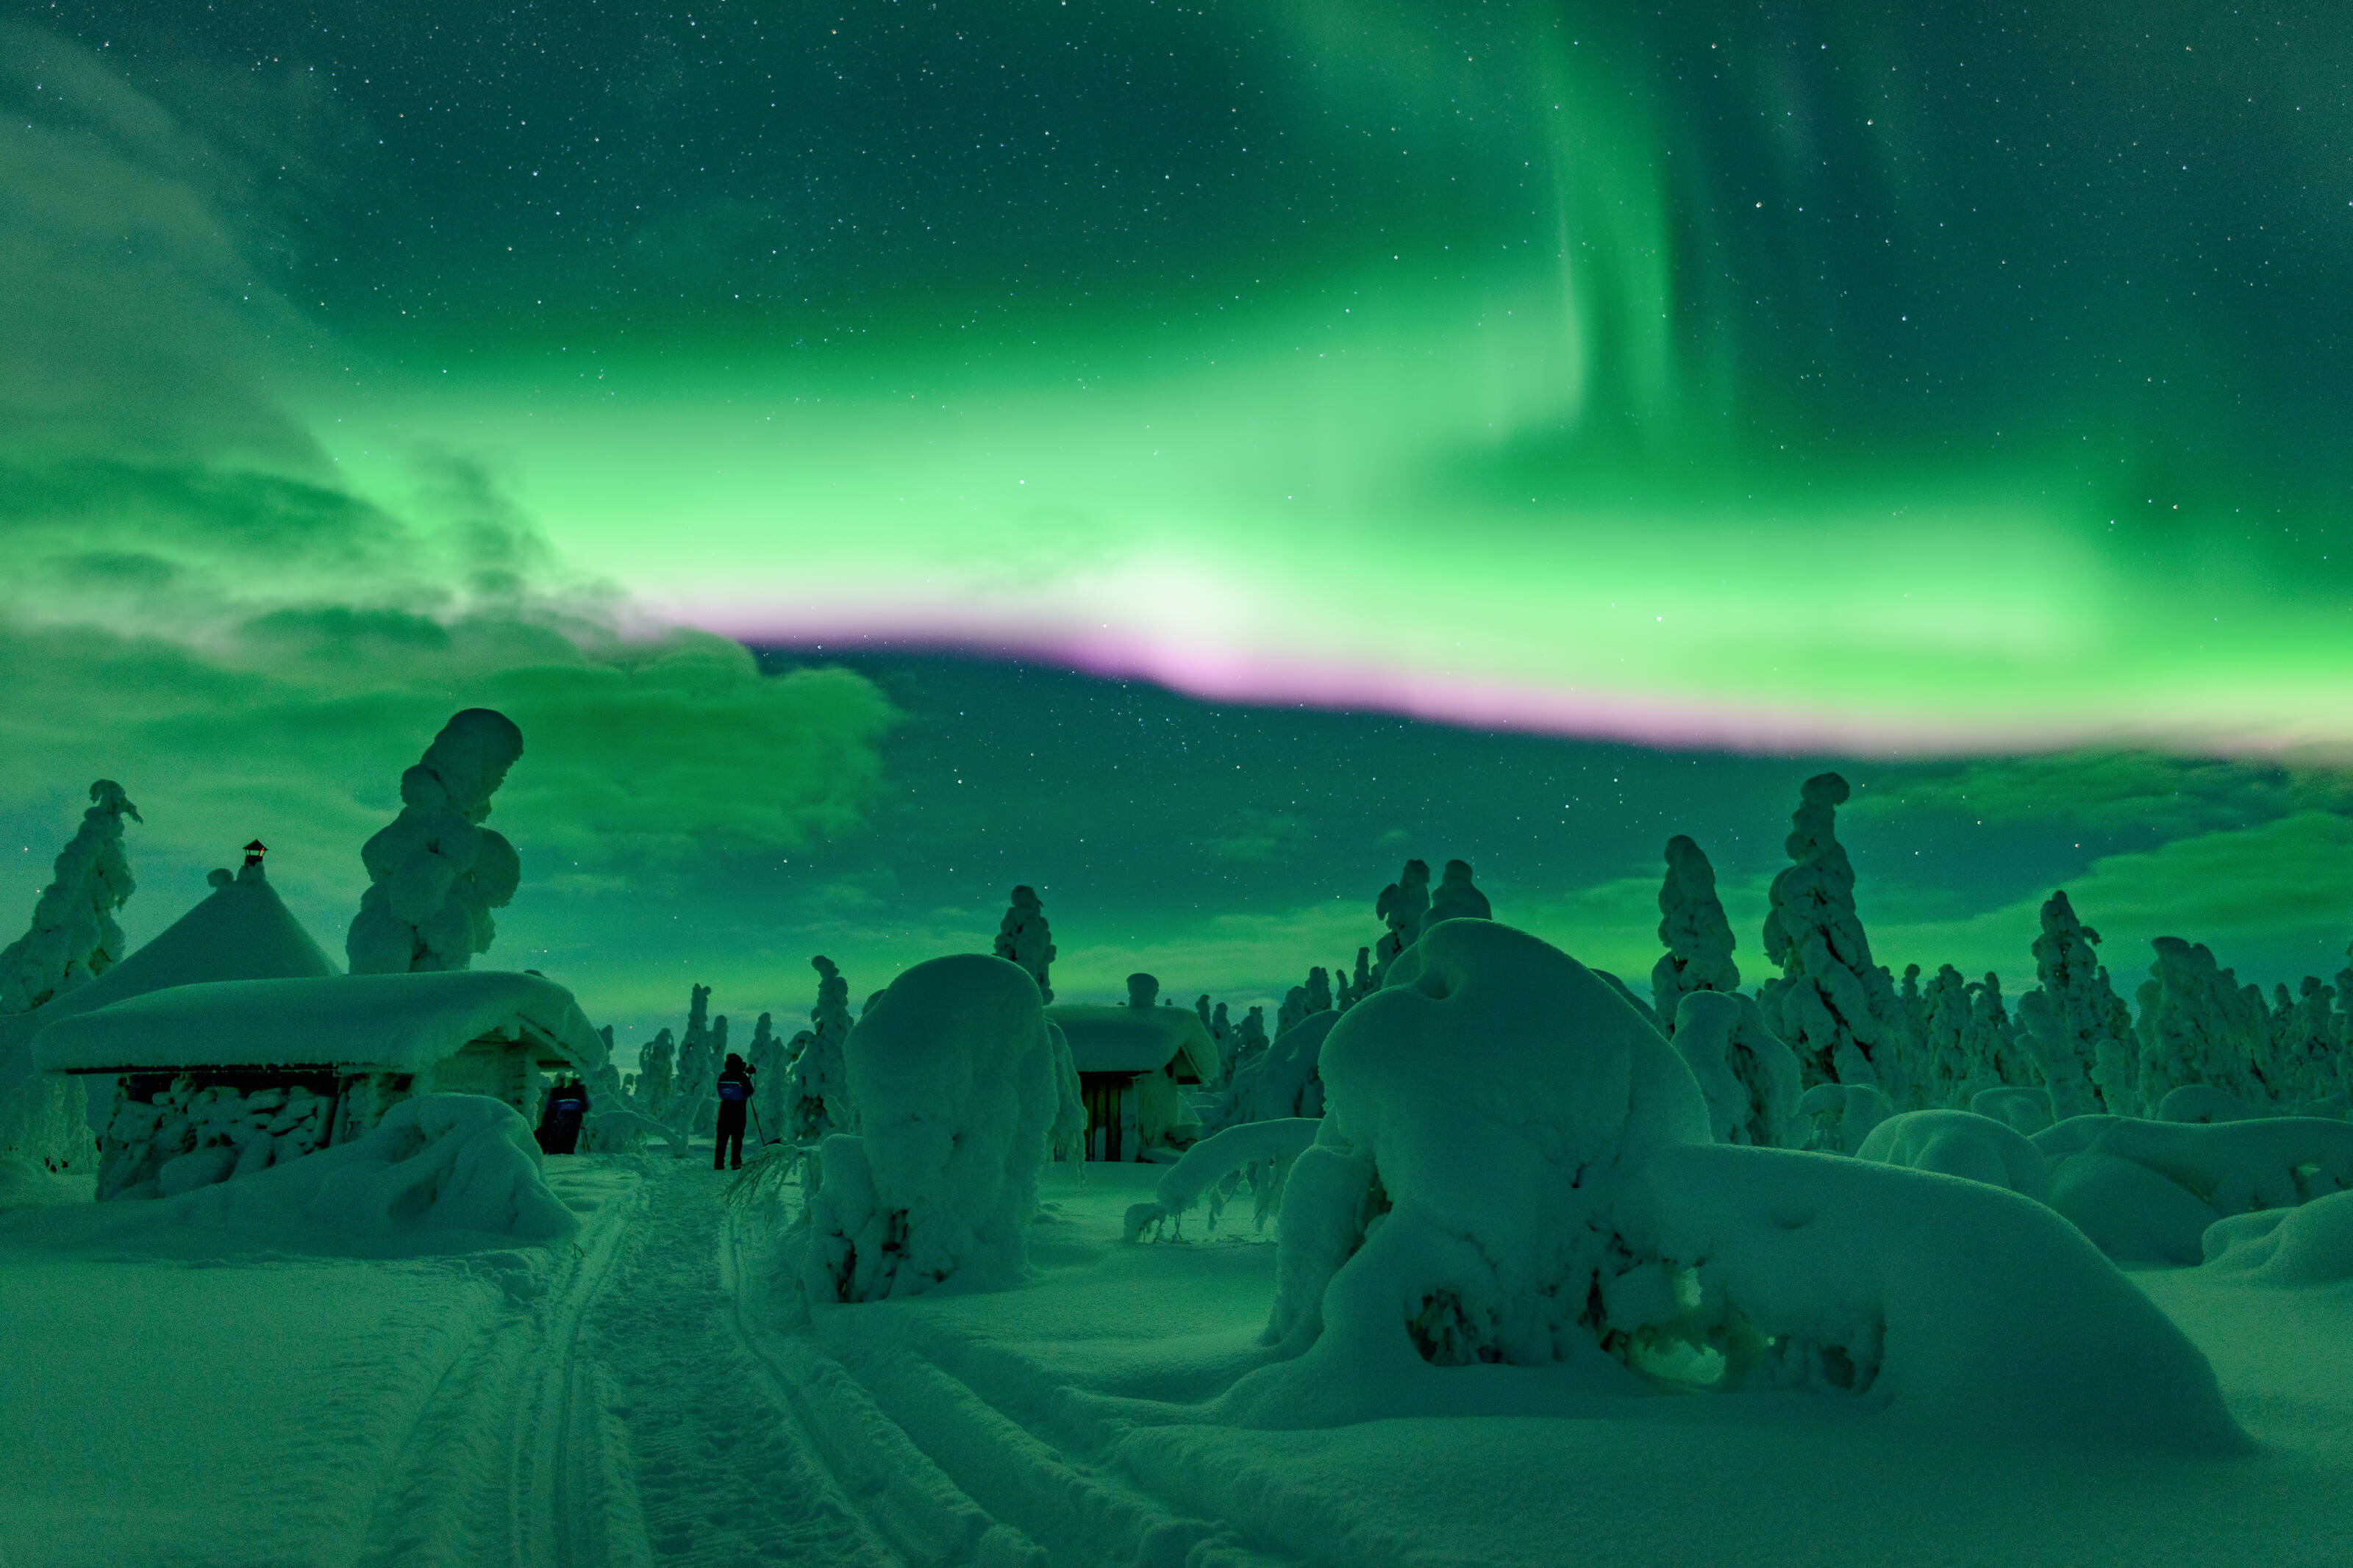 Northern lights and a green sky in Lapland, Finland during winter